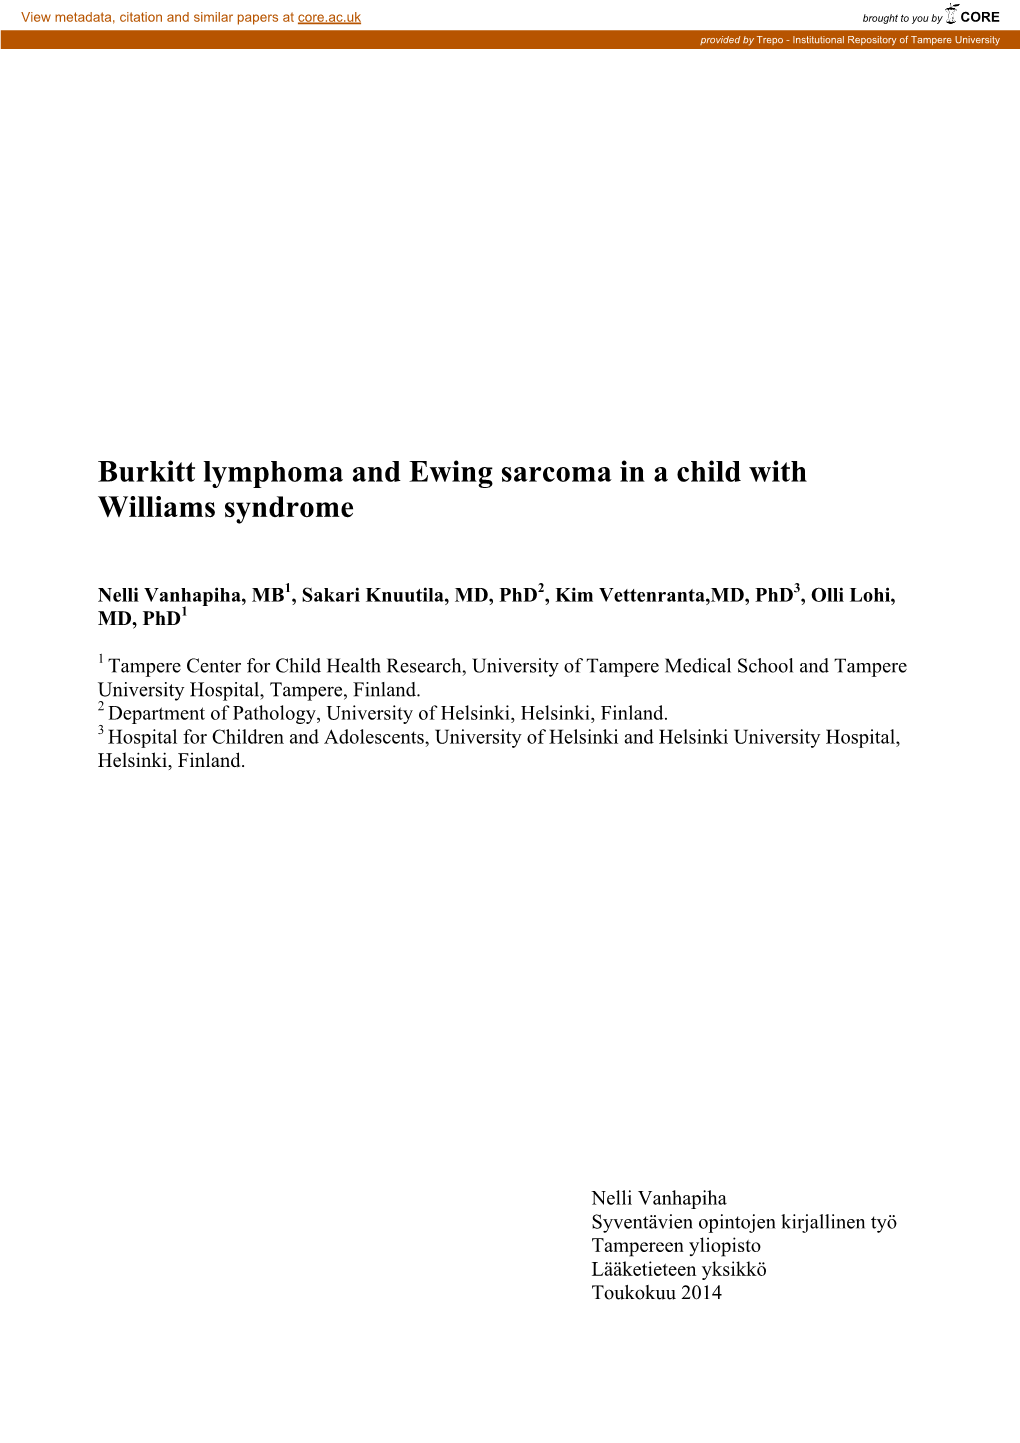 Burkitt Lymphoma and Ewing Sarcoma in a Child with Williams Syndrome